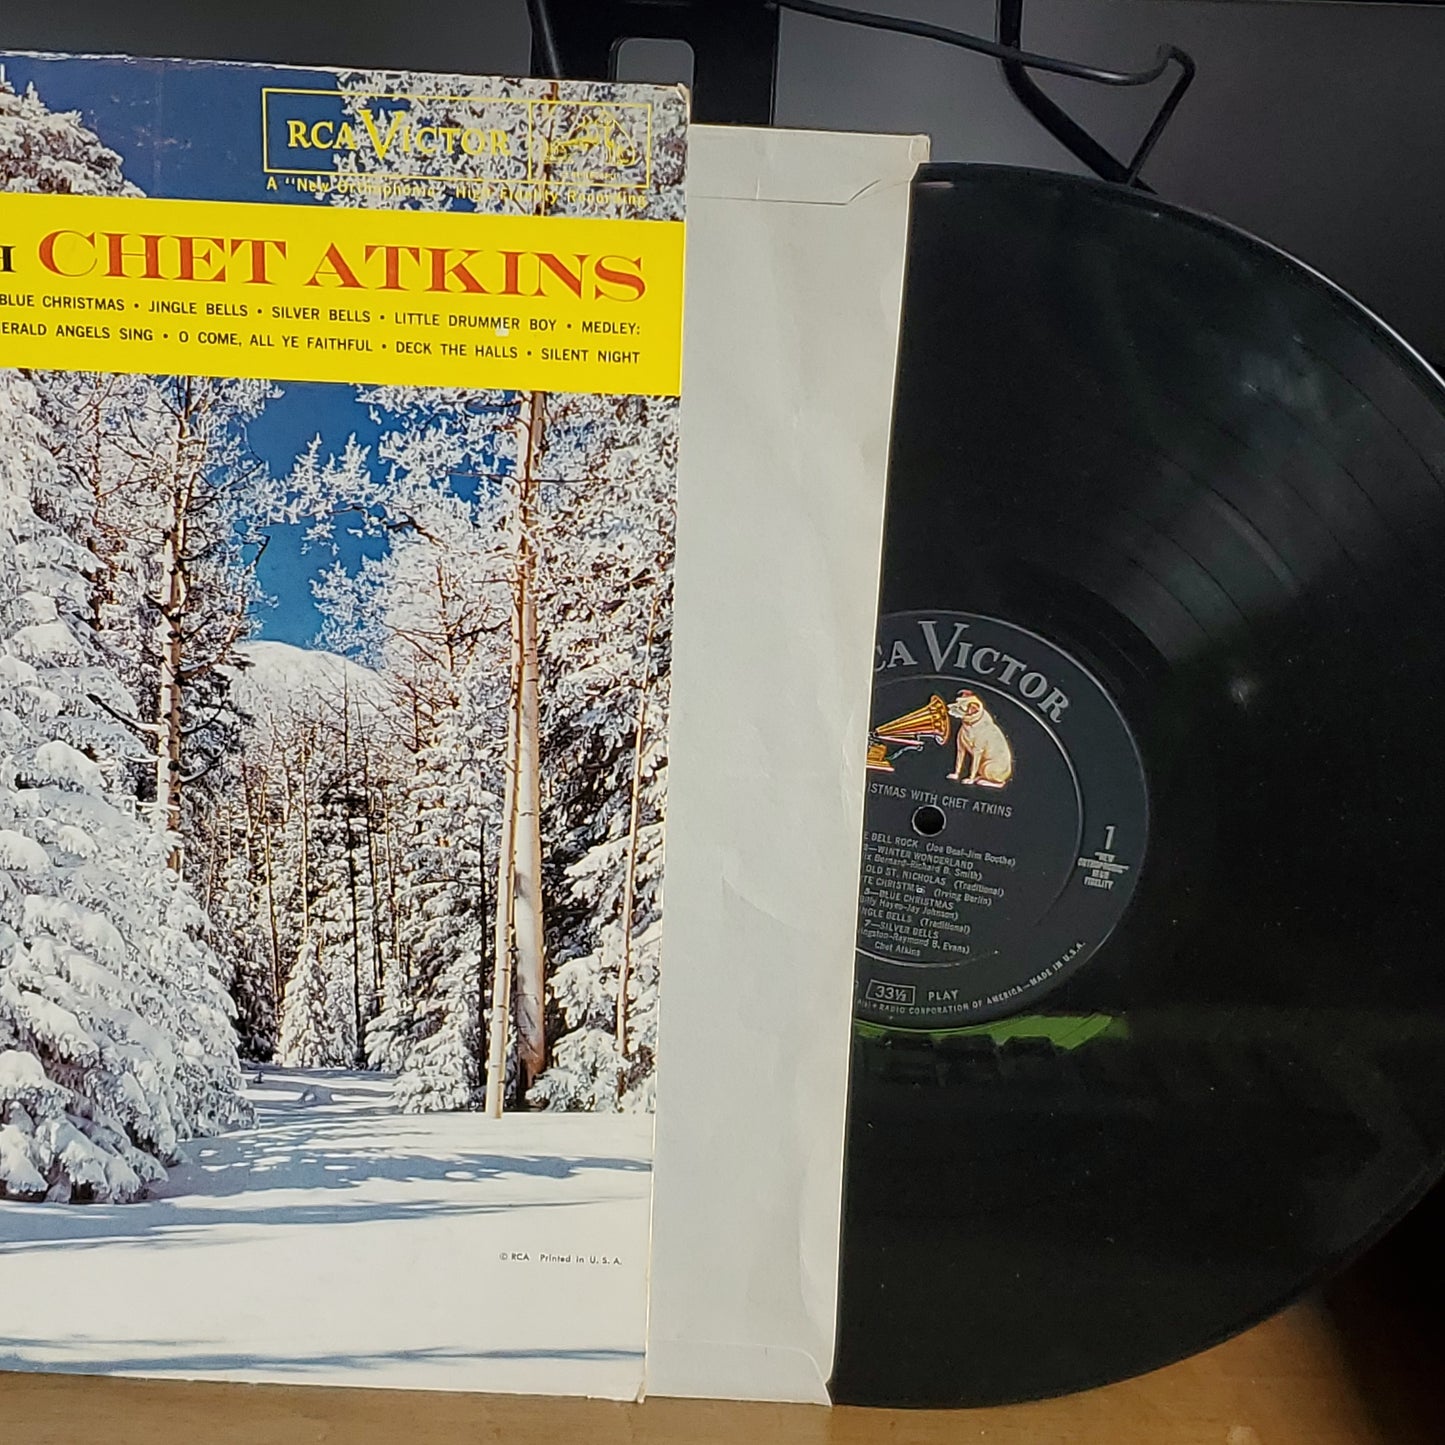 Christmas With Chet Atkins Produced By Chet Atkins By RCA Victor's Monophonic Records